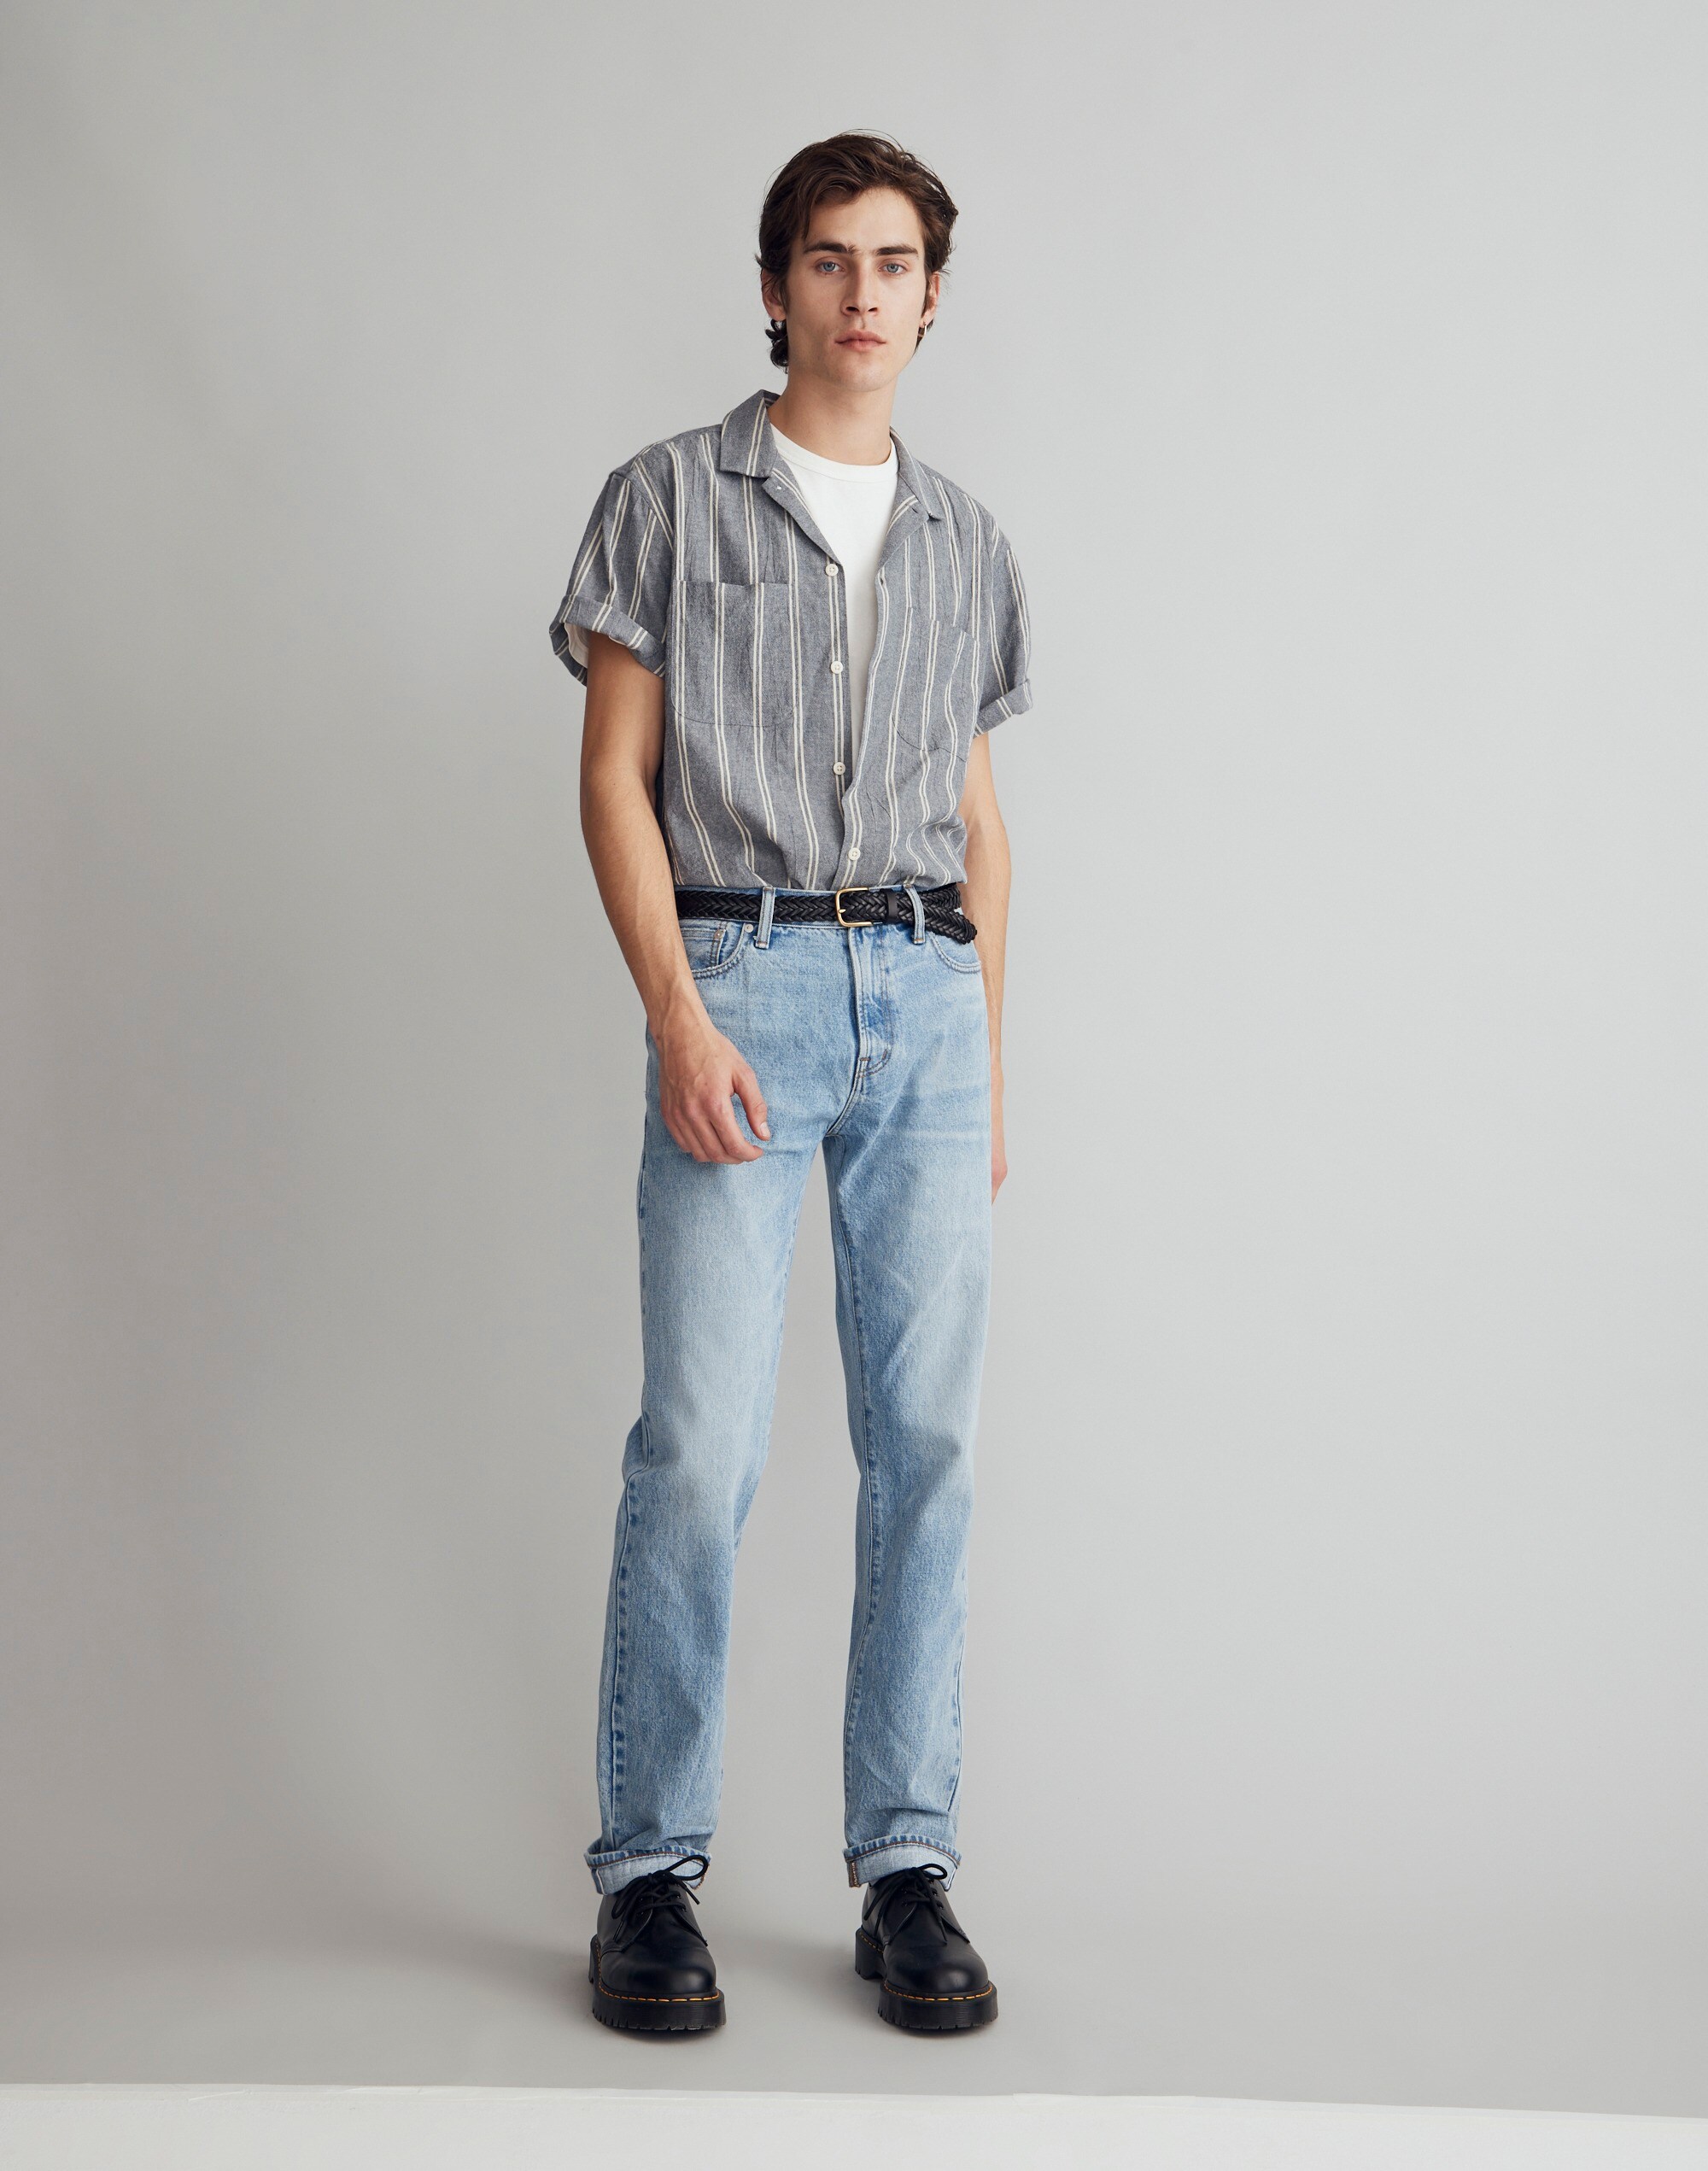 Vintage Bootcut Jeans in Lyford Wash